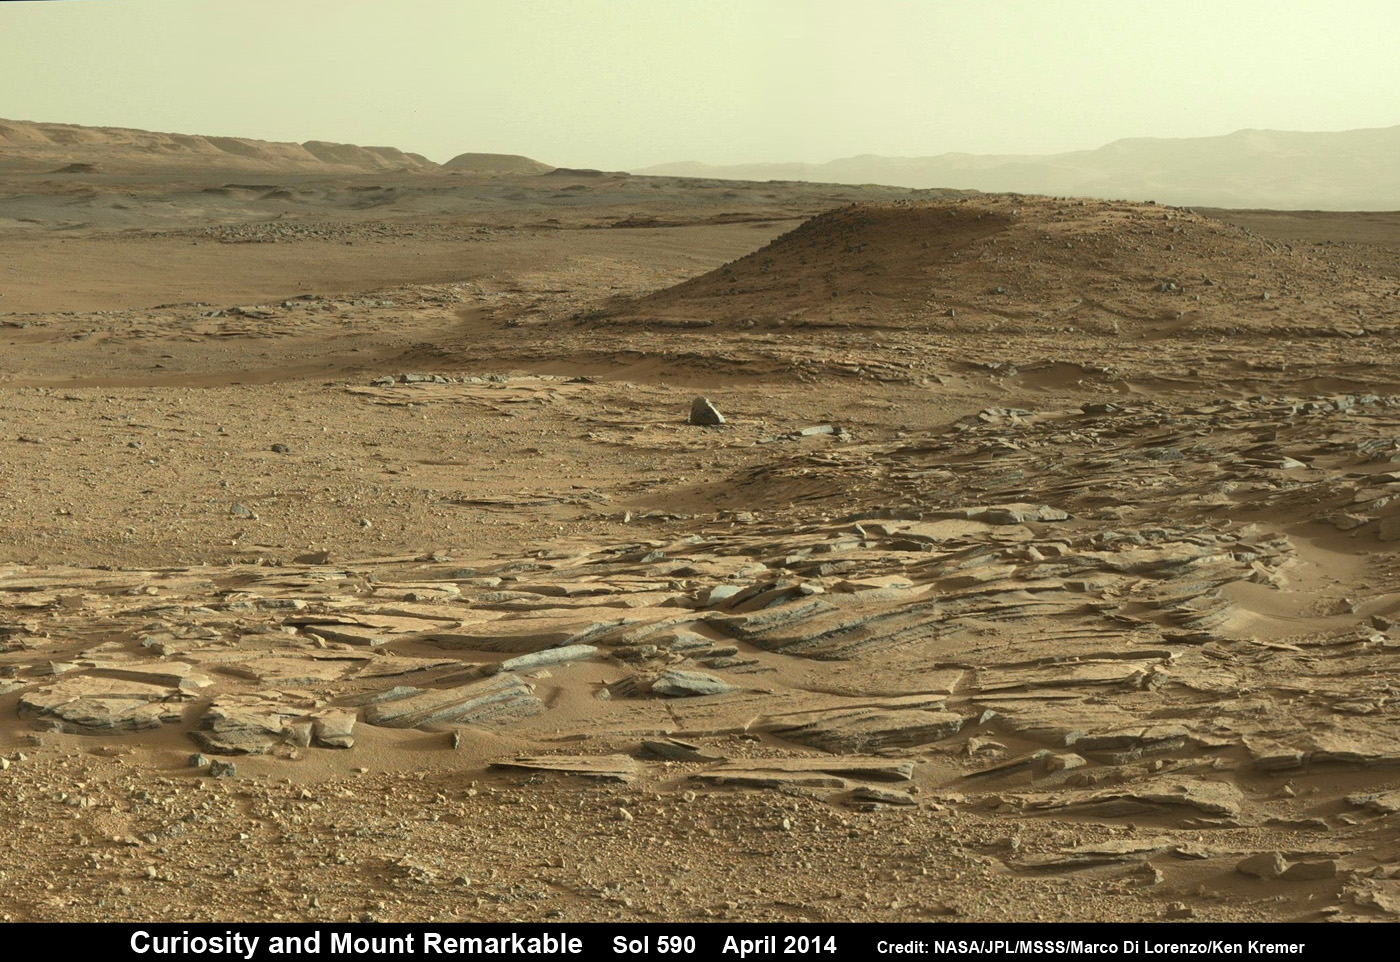 Curiosity scans scientifically intriguing rock outcrops of gorgeous Martian terrain at ‘The Kimberley’ waypoint in search of next drilling location beside Mount Remarkable butte, at right. Mastcam color photo mosaic assembled from raw images snapped on Sol 590, April 4, 2014. Credit: NASA/JPL/MSSS/Marco Di Lorenzo/Ken Kremer – kenkremer.com